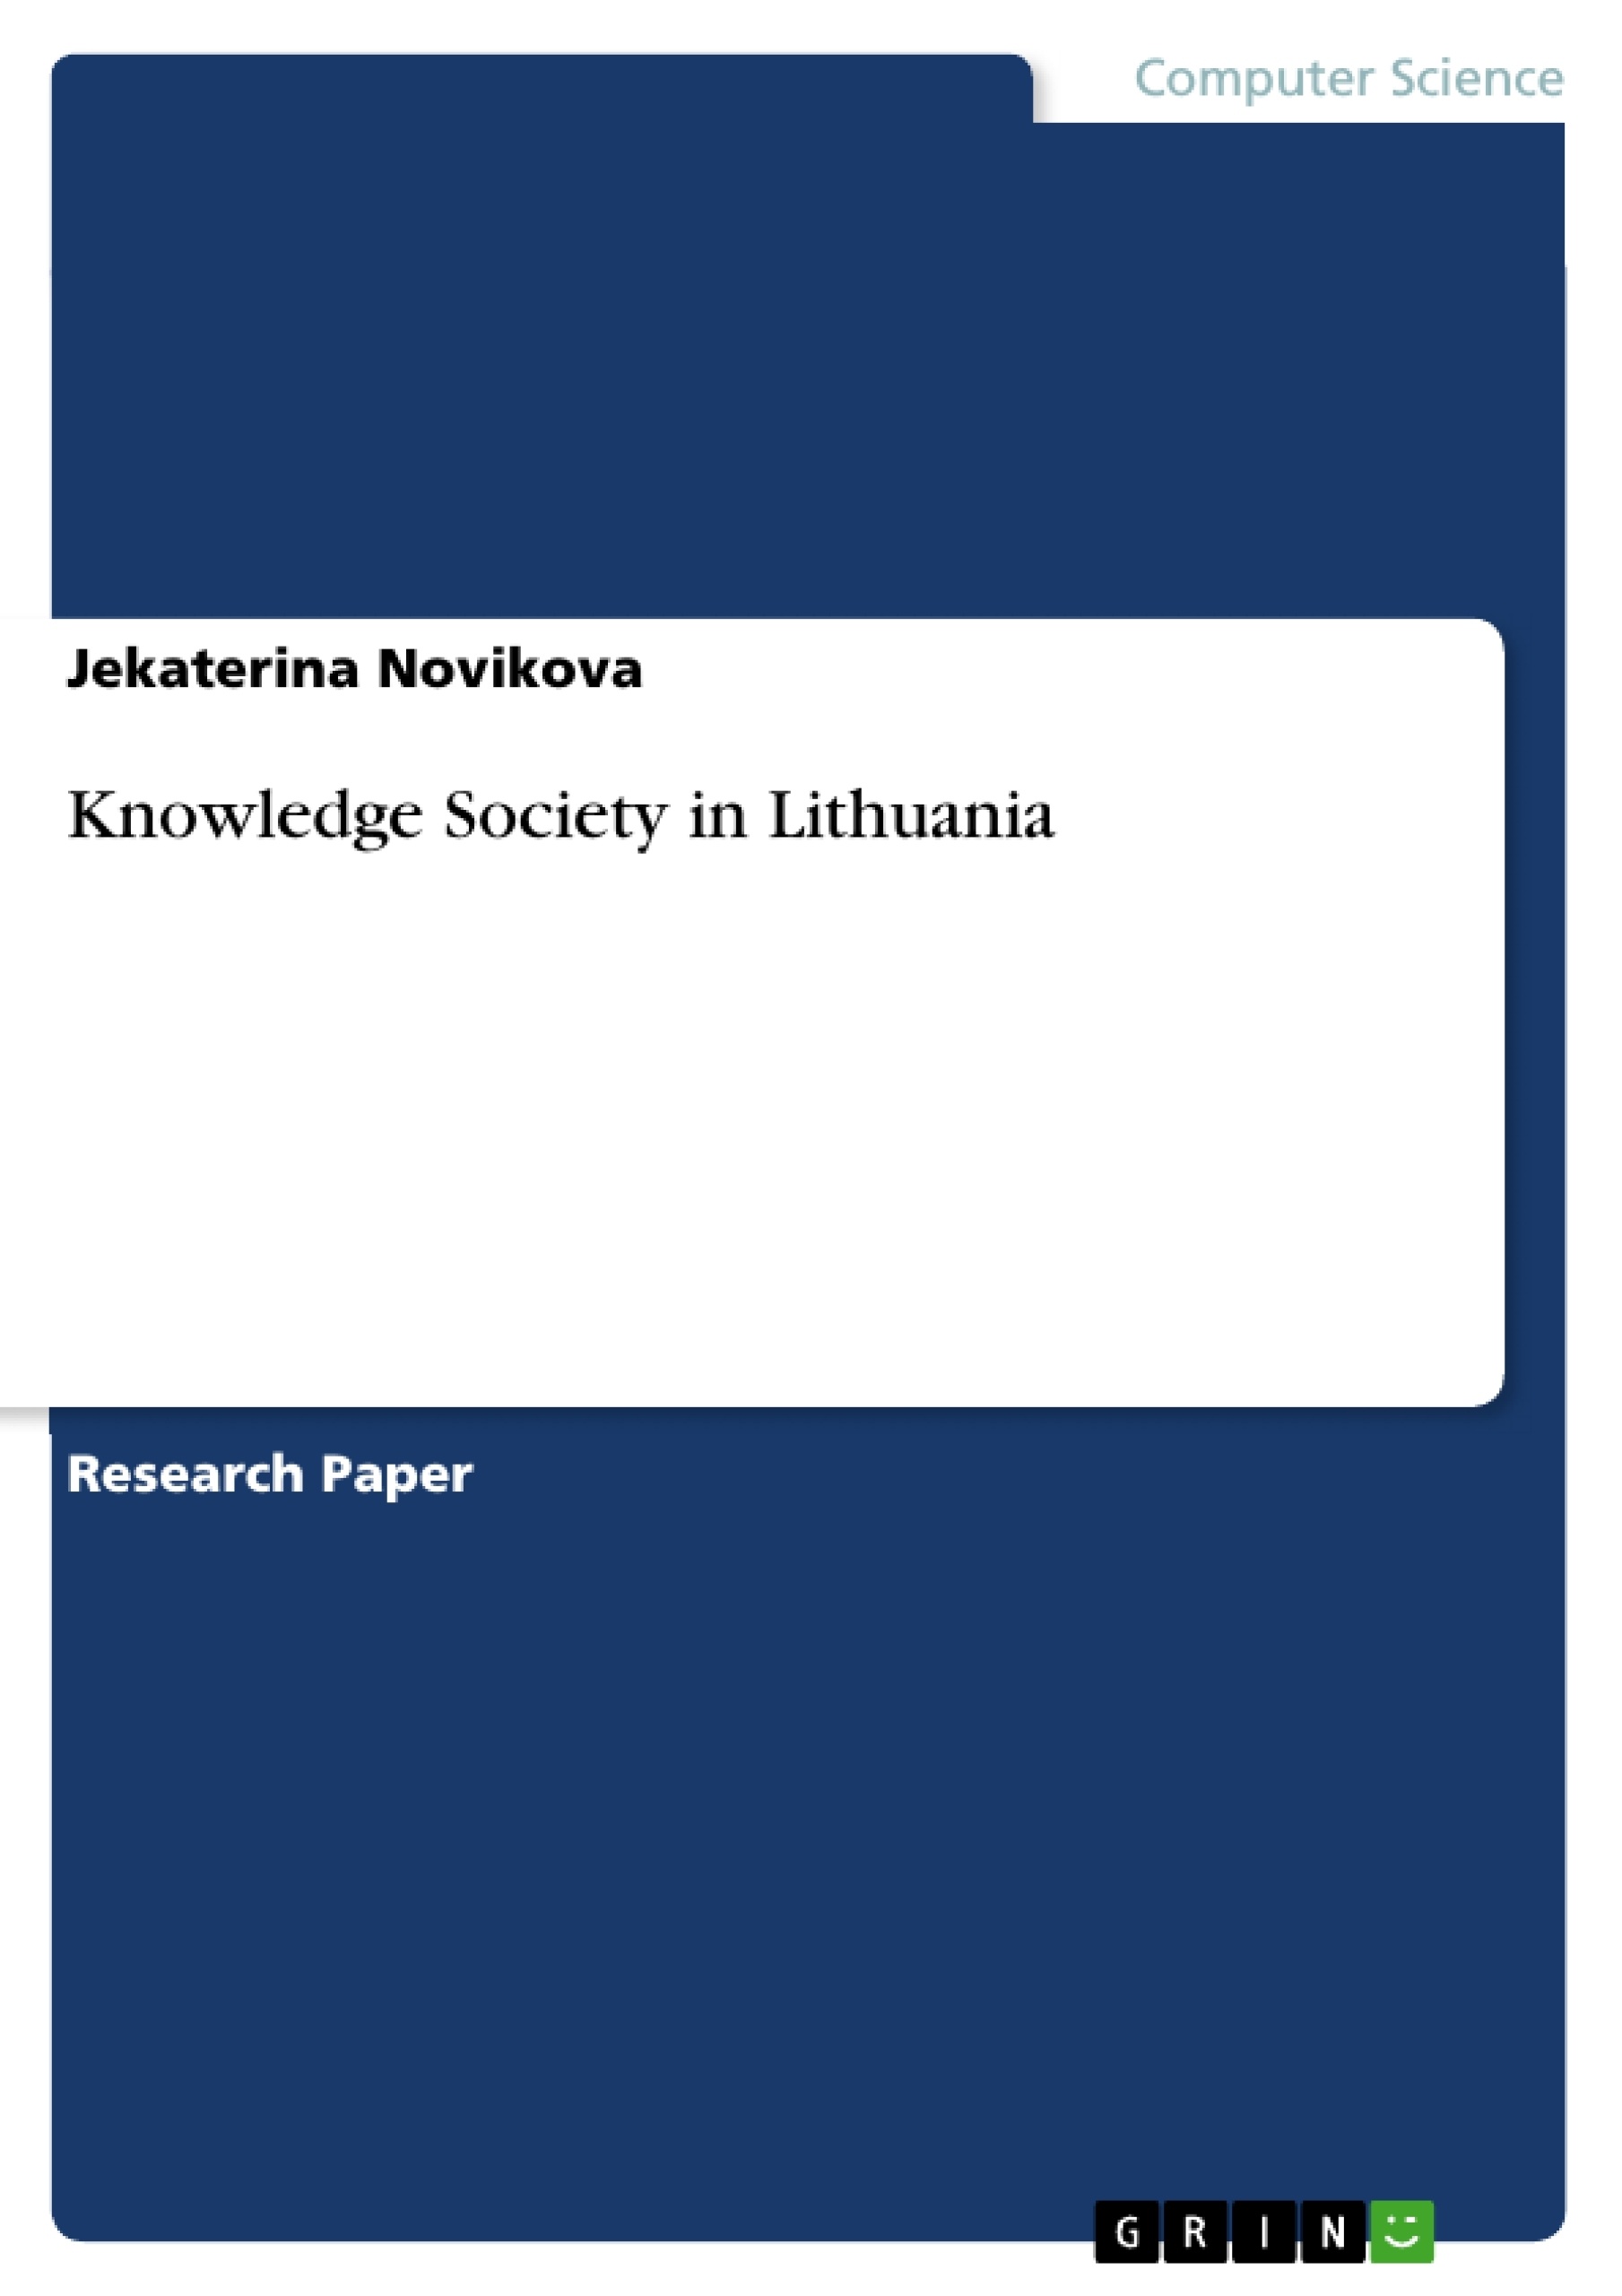 Title: Knowledge Society in Lithuania